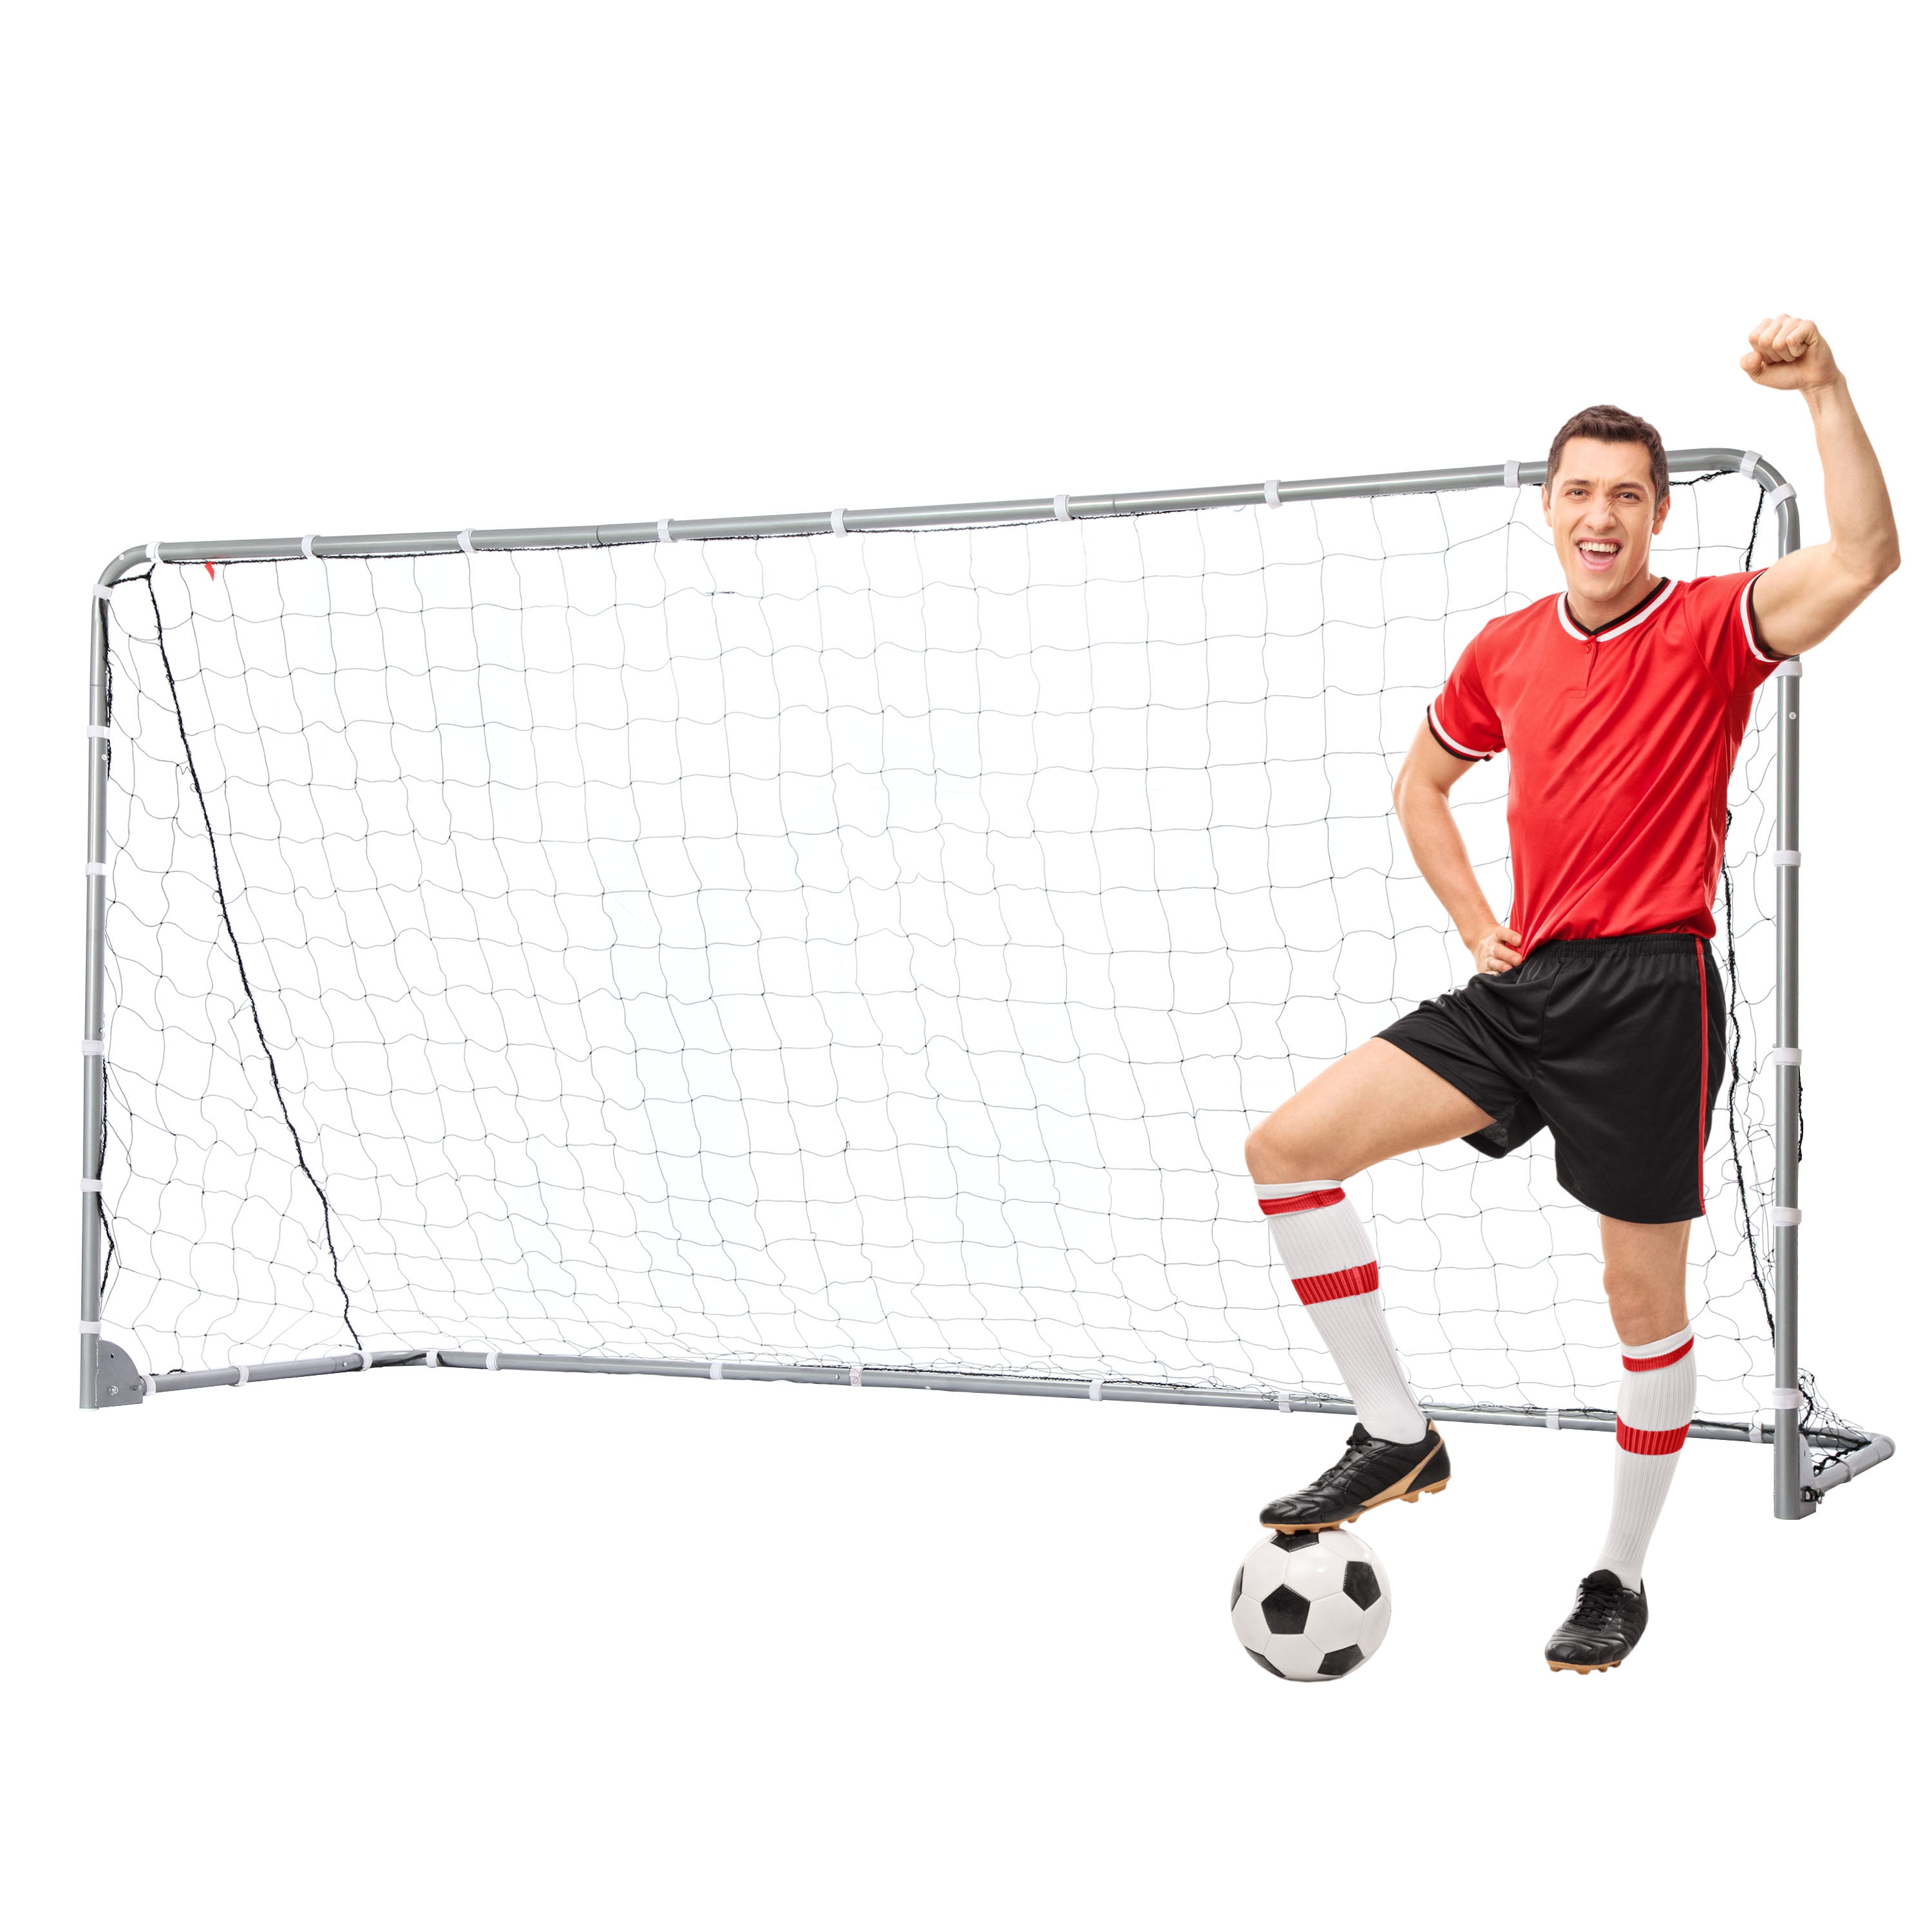 Sliver E-Jet Soccer Goals Metal Football Goals Outdoor Training Nets Backyard Practice Large Size 12' x 6' Quick Folding & Easy Storage 